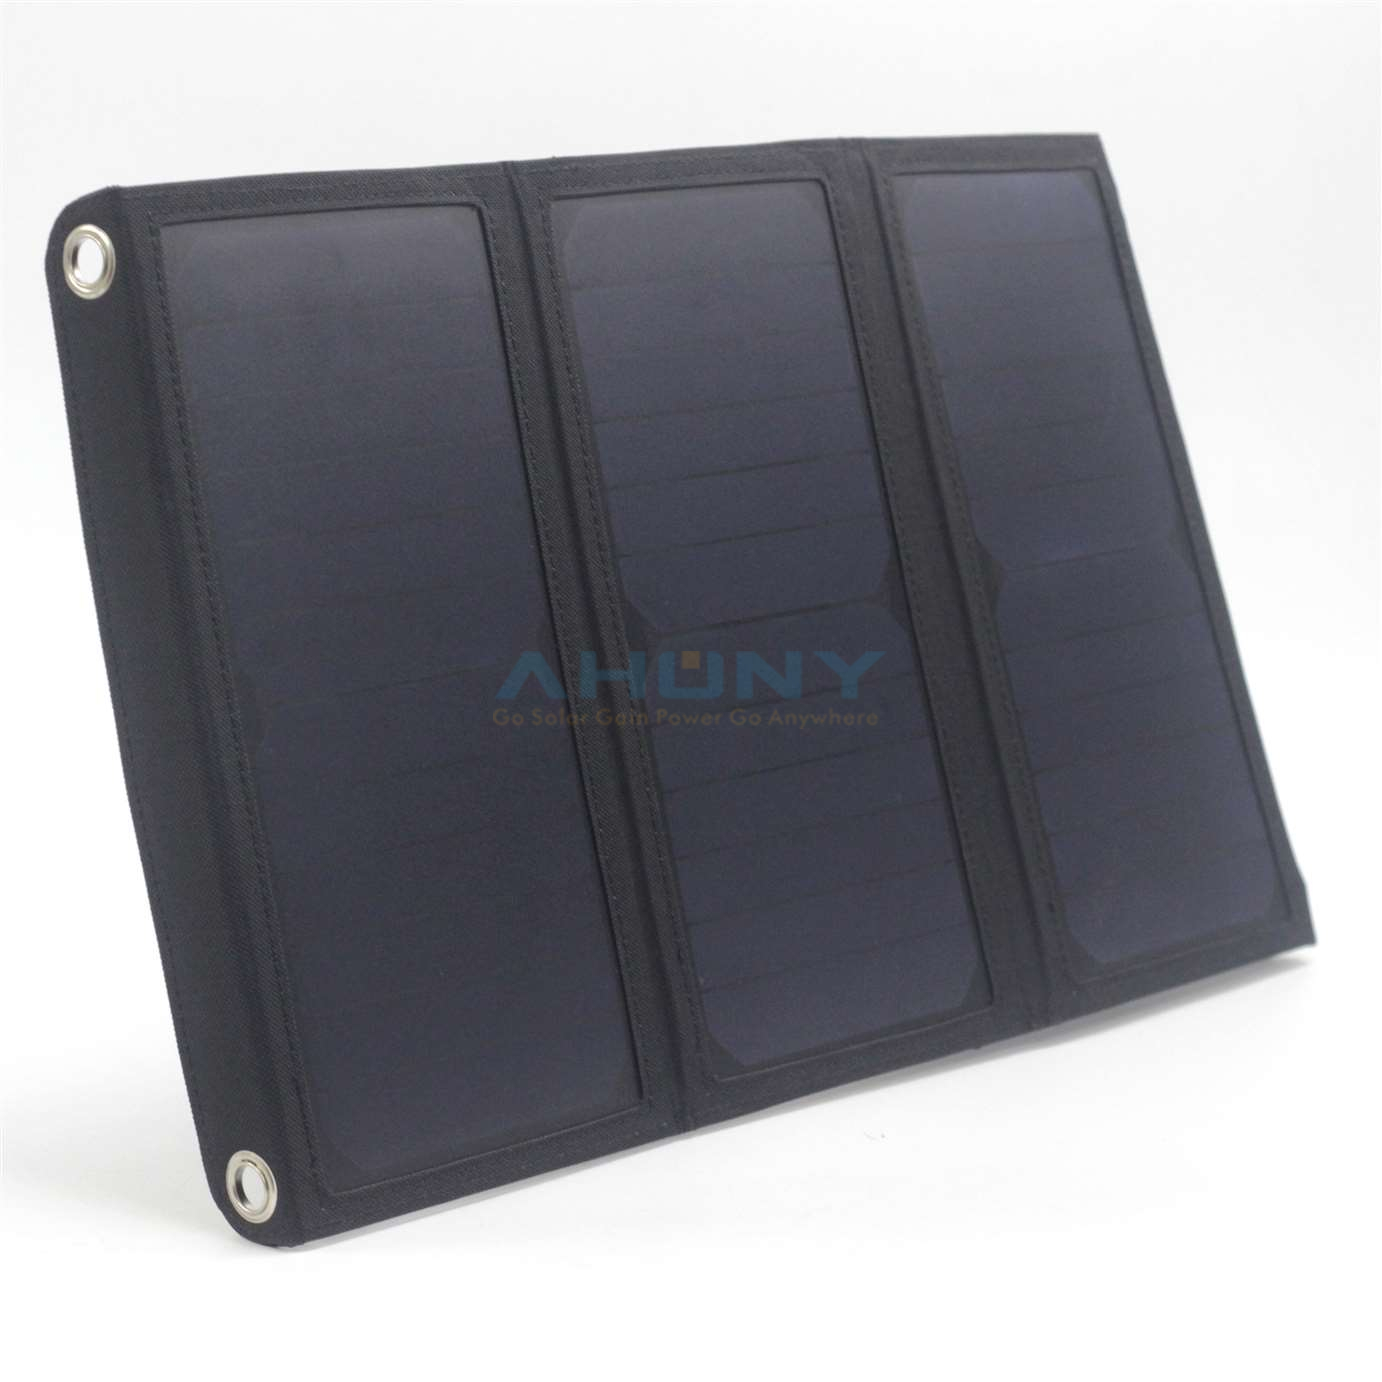 21w folding solar charger dual USB for powerbank portable solar small size mobile charger